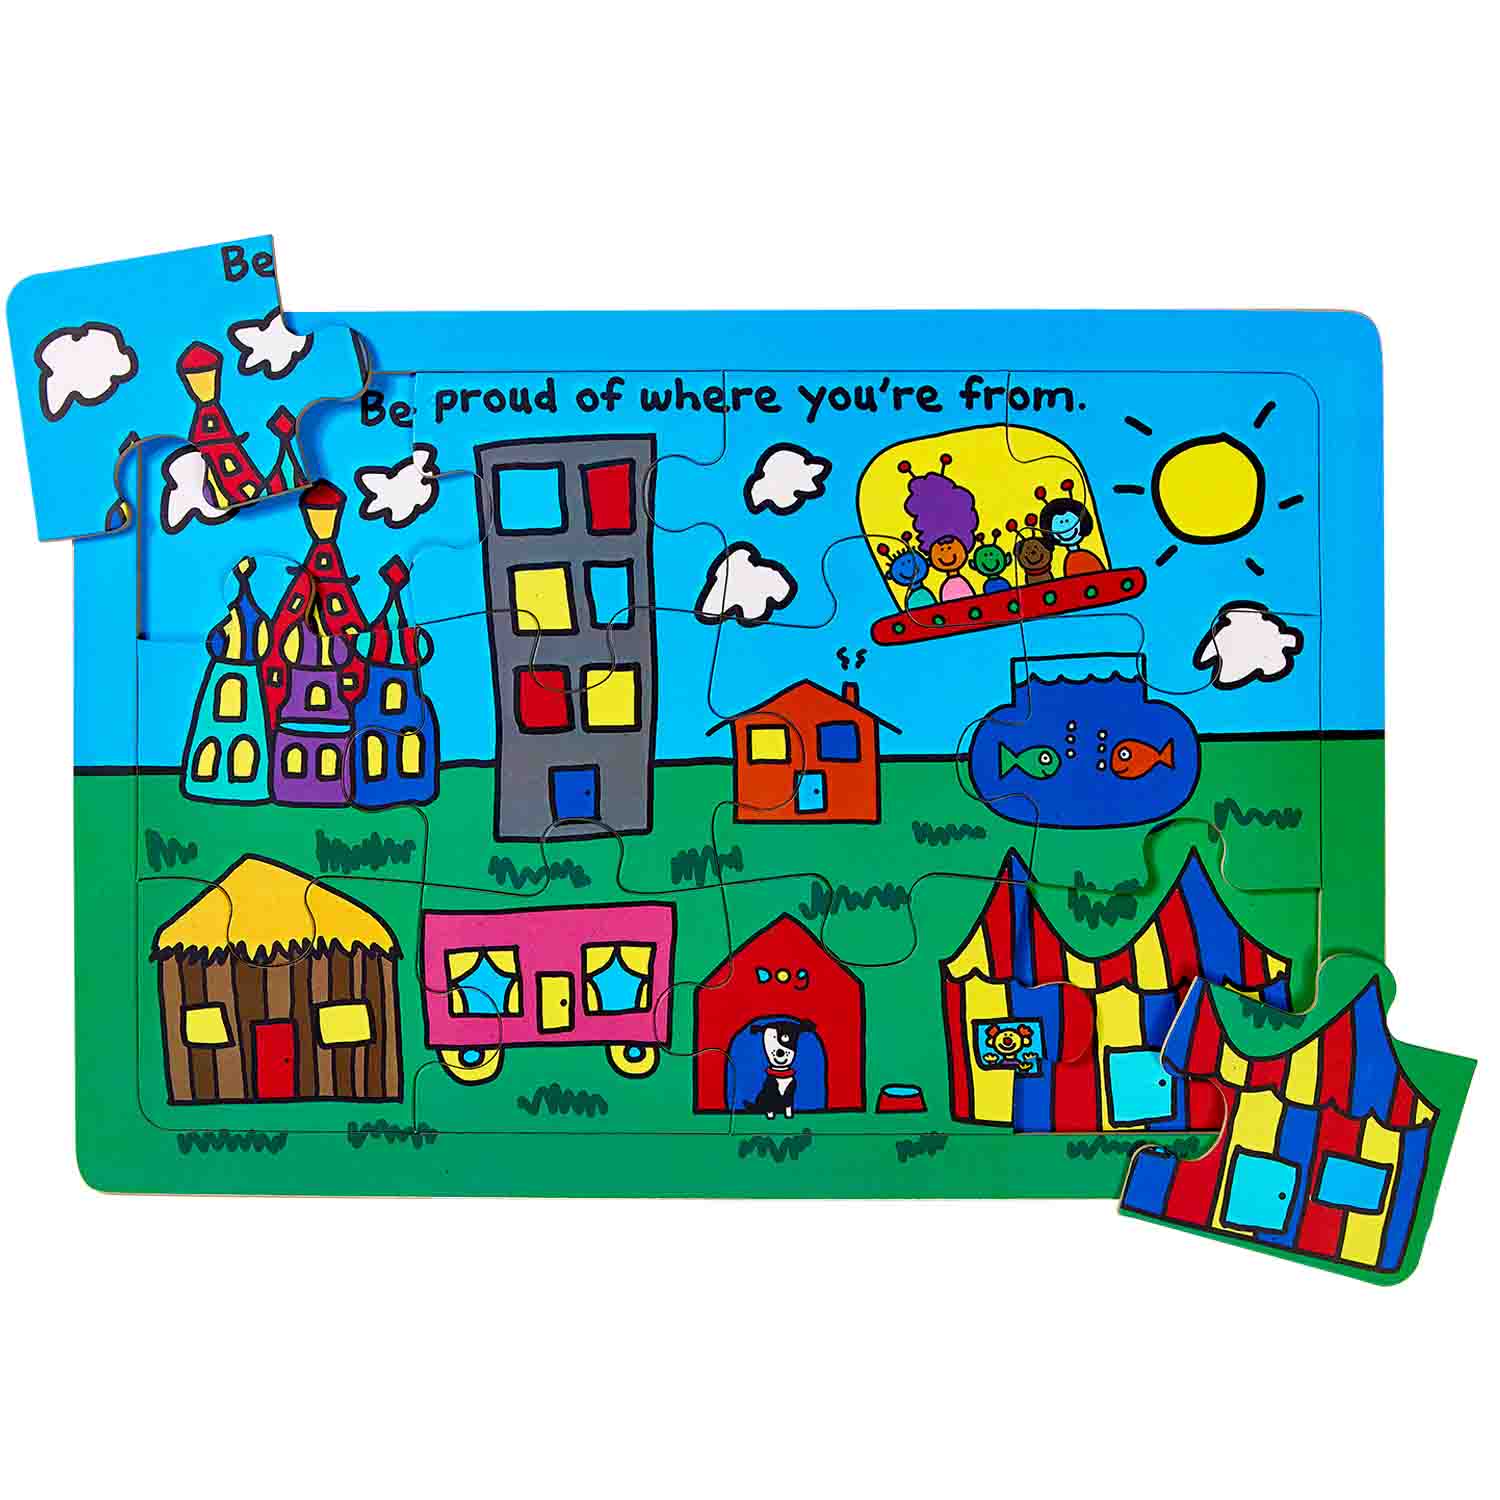 Becker's Be Who You Are Puzzle Set